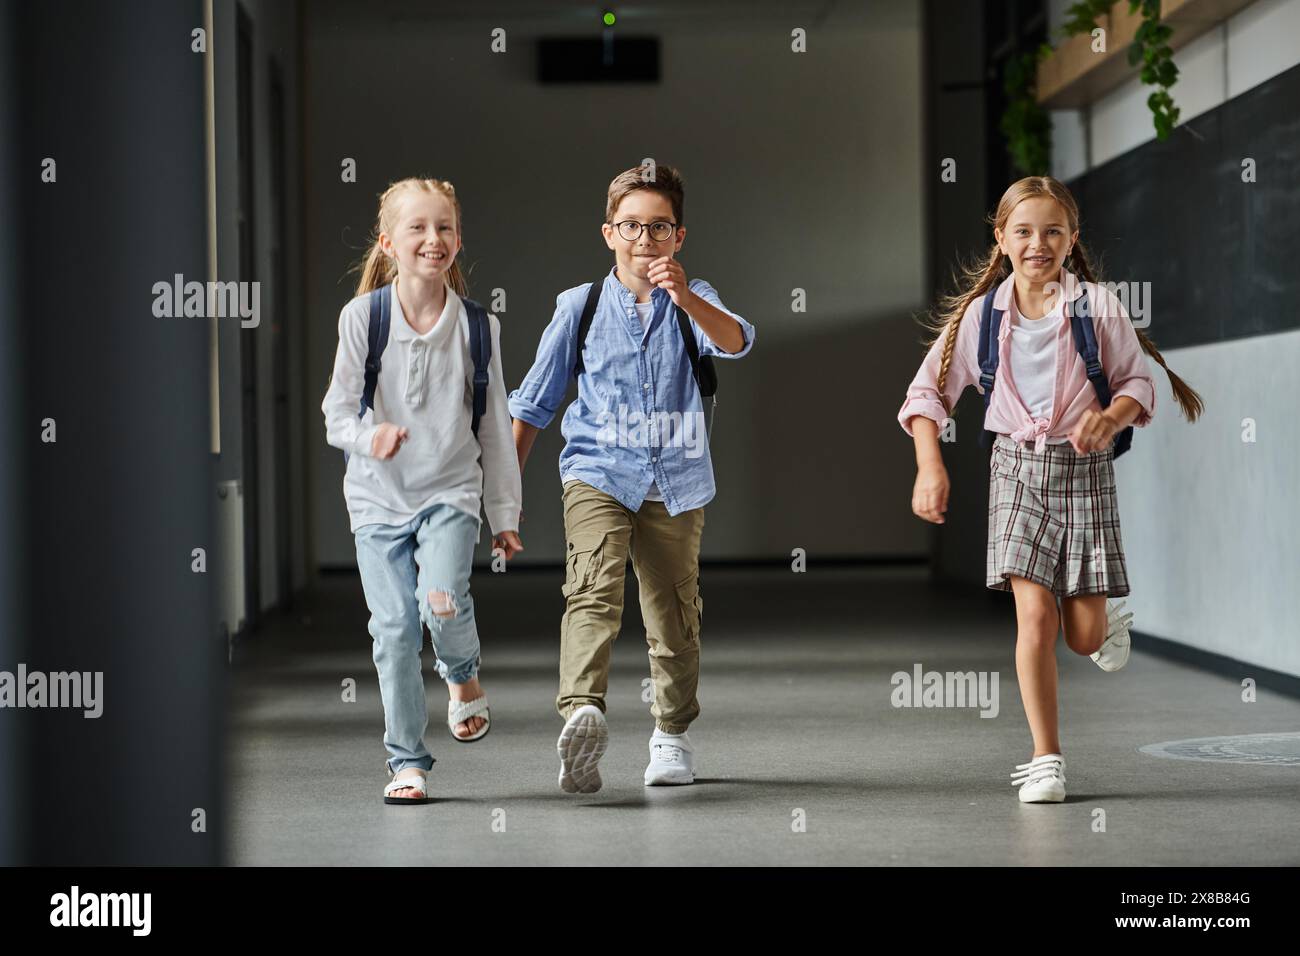 group of young children joyfully walking down a bright hallway Stock Photo